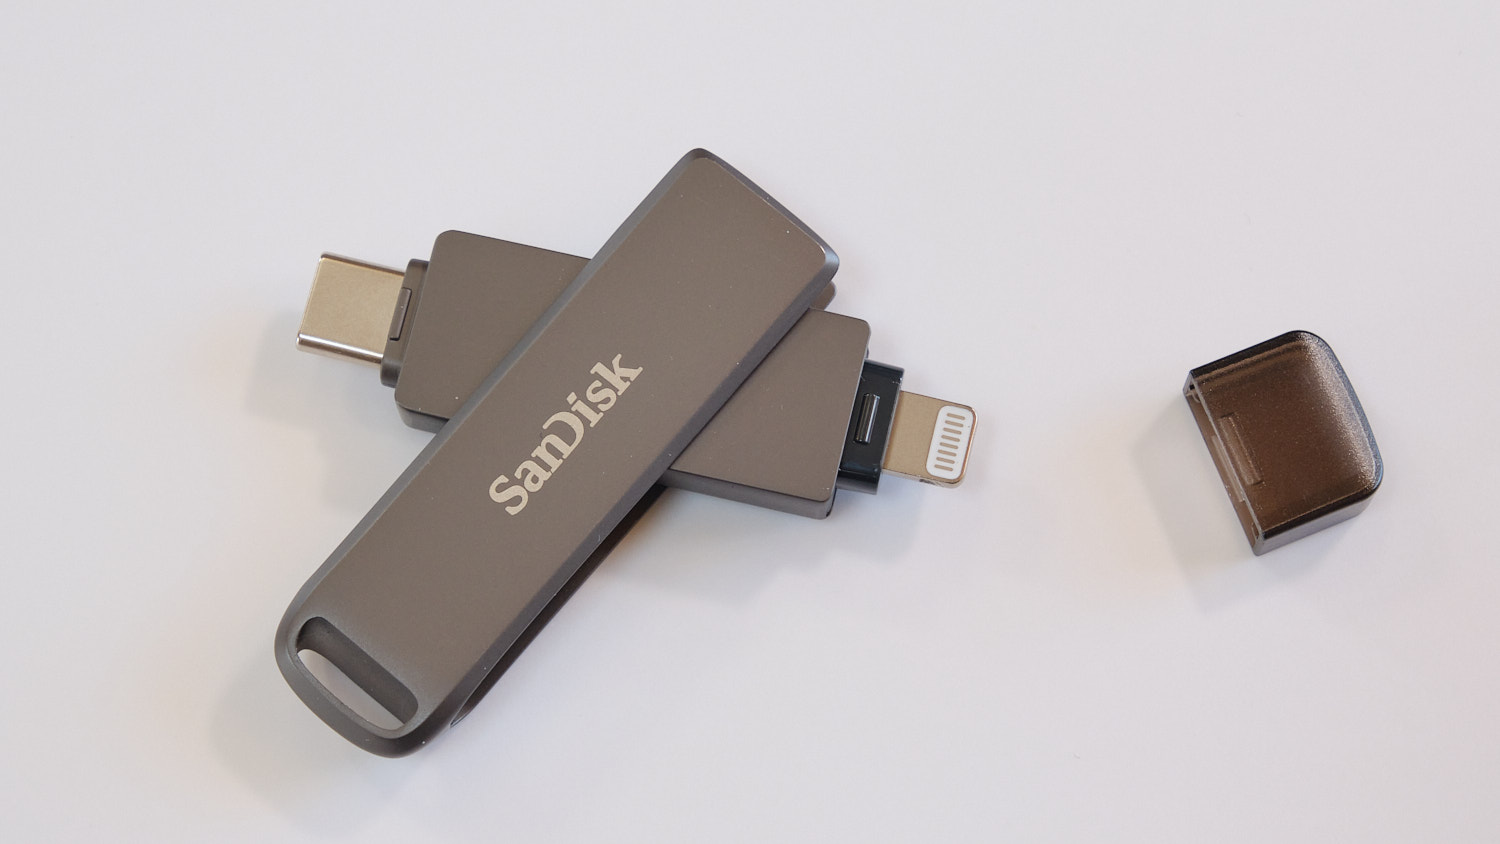 Sandisk iXpand Flash Drive Luxe